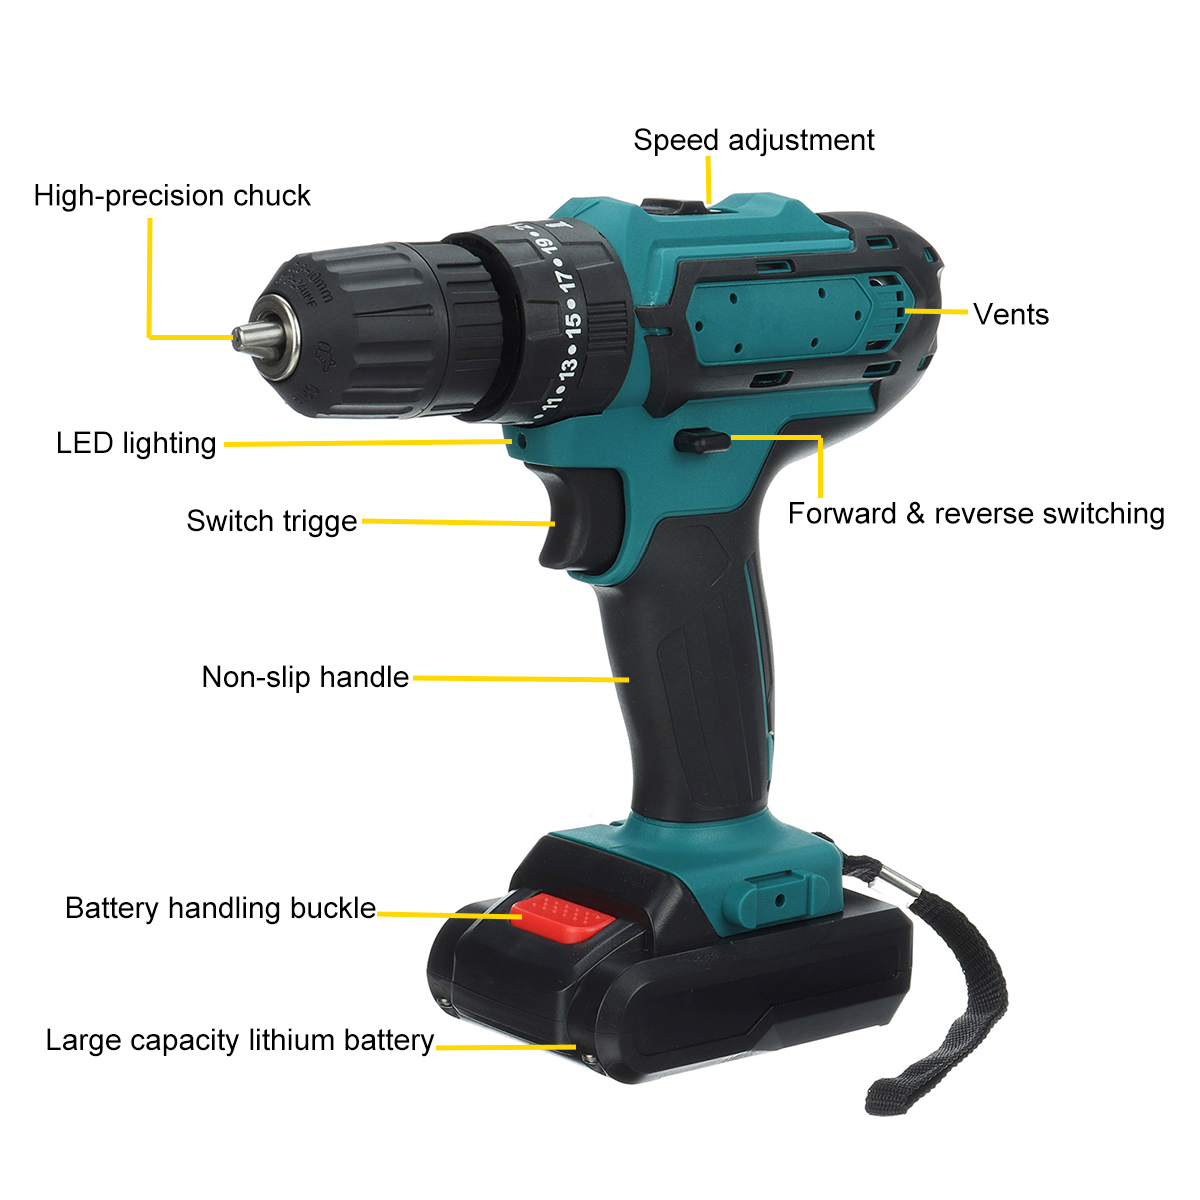 Cordless-Rechargeable-Electric-Drill-Screwdriver-LED-Portable-Metal-Wood-Drilling-Tool-W-12pcs-Batte-1848720-9